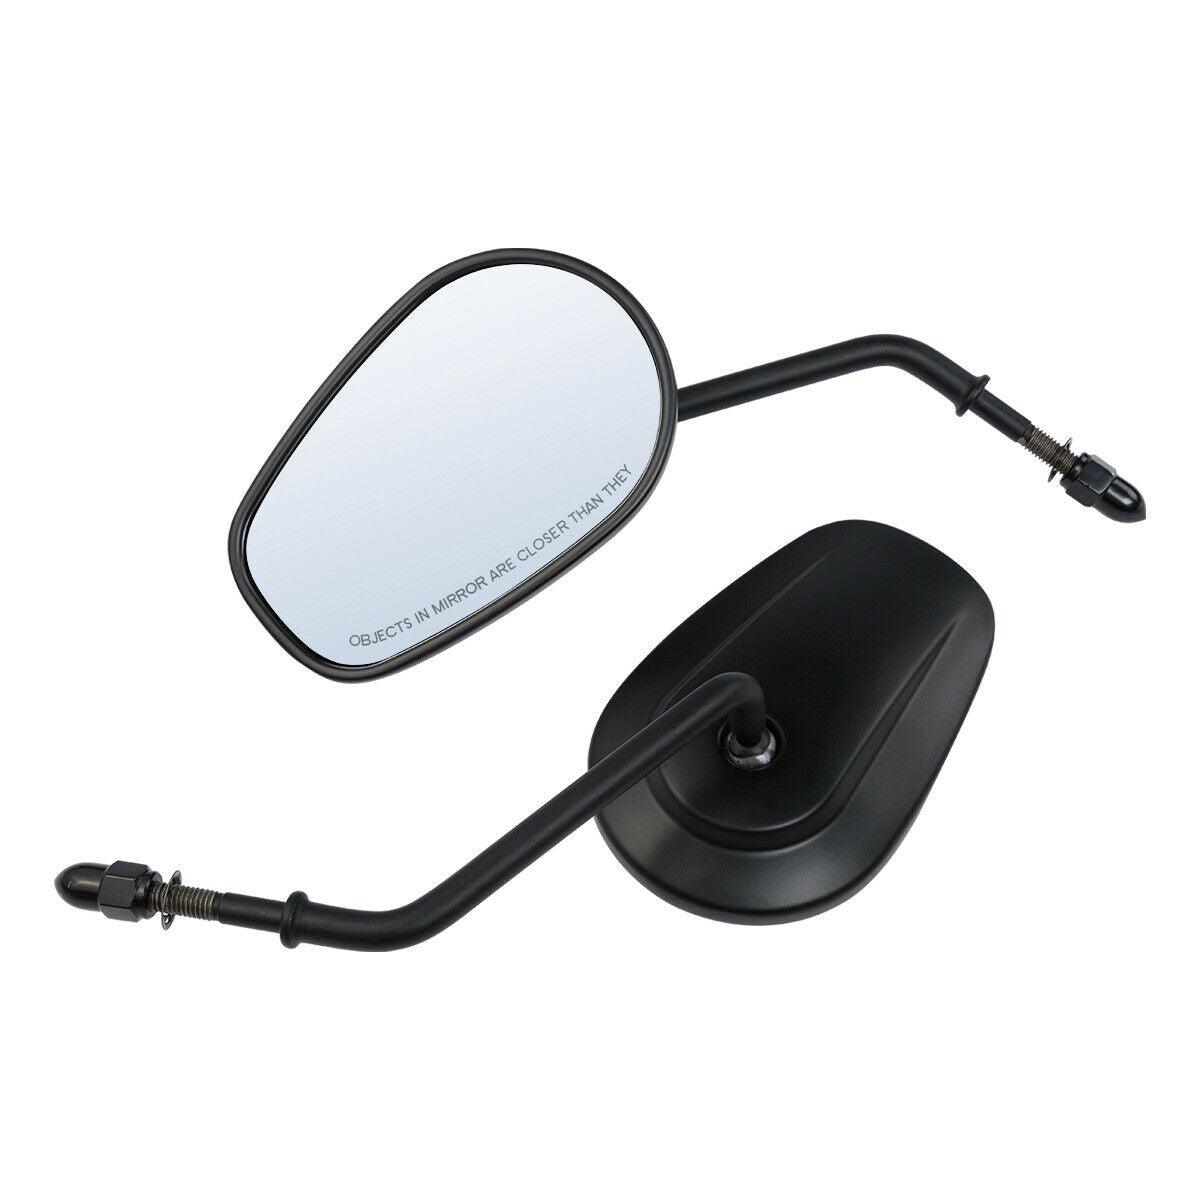 8mm Rear View Side Mirrors Fit For Harley Sportster XL883 1200 Touring Softail - Moto Life Products